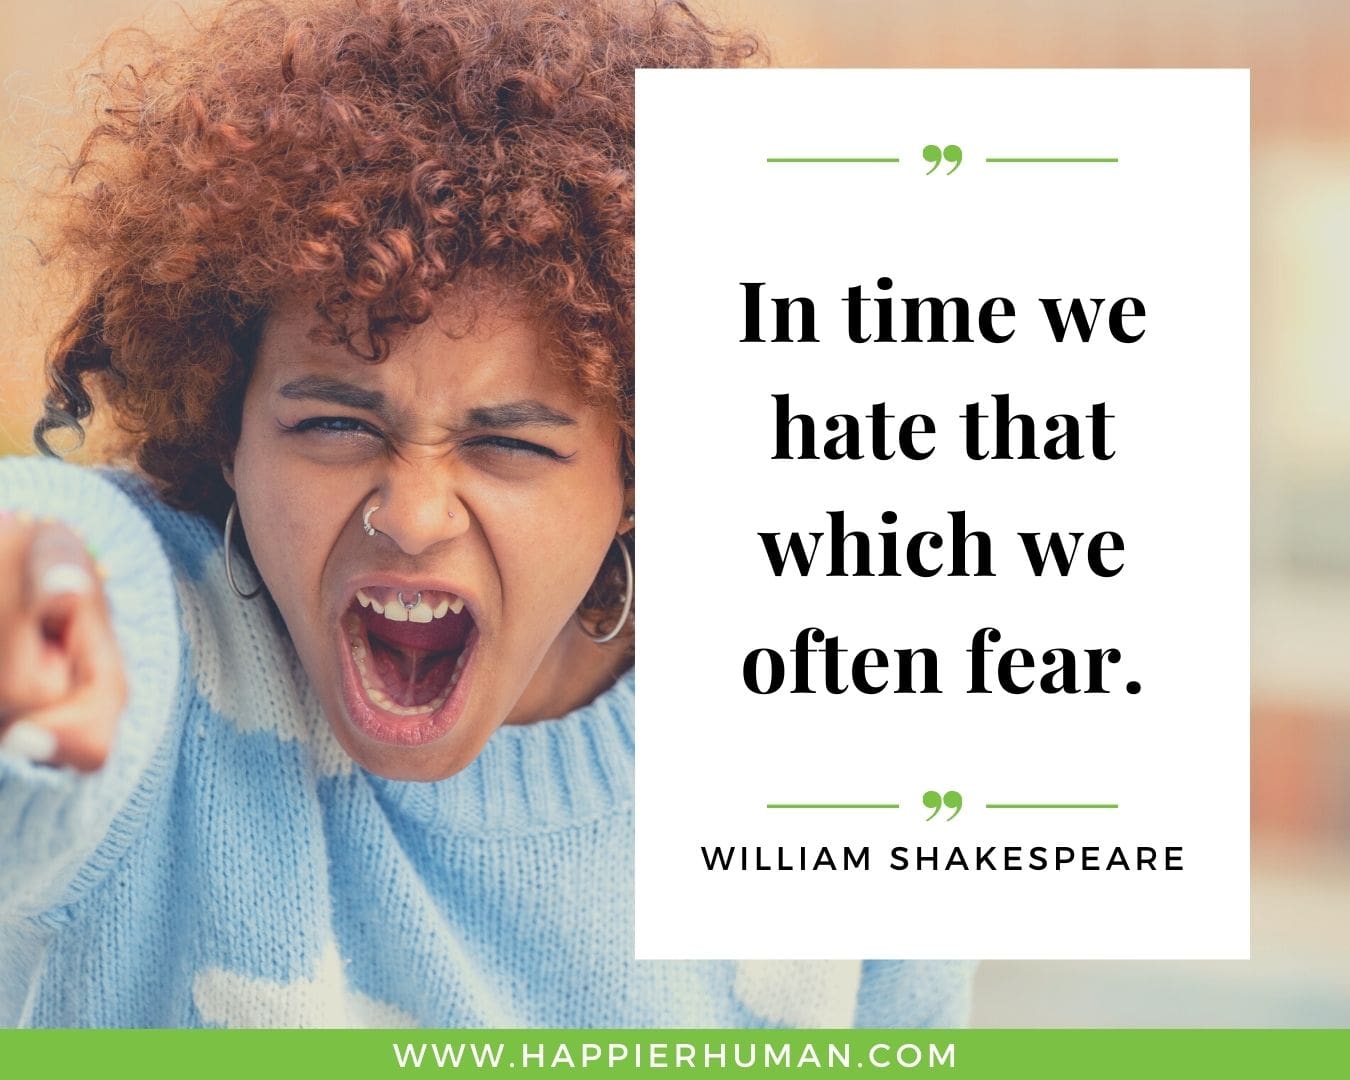 Haters Quotes - “In time we hate that which we often fear.” - William Shakespeare